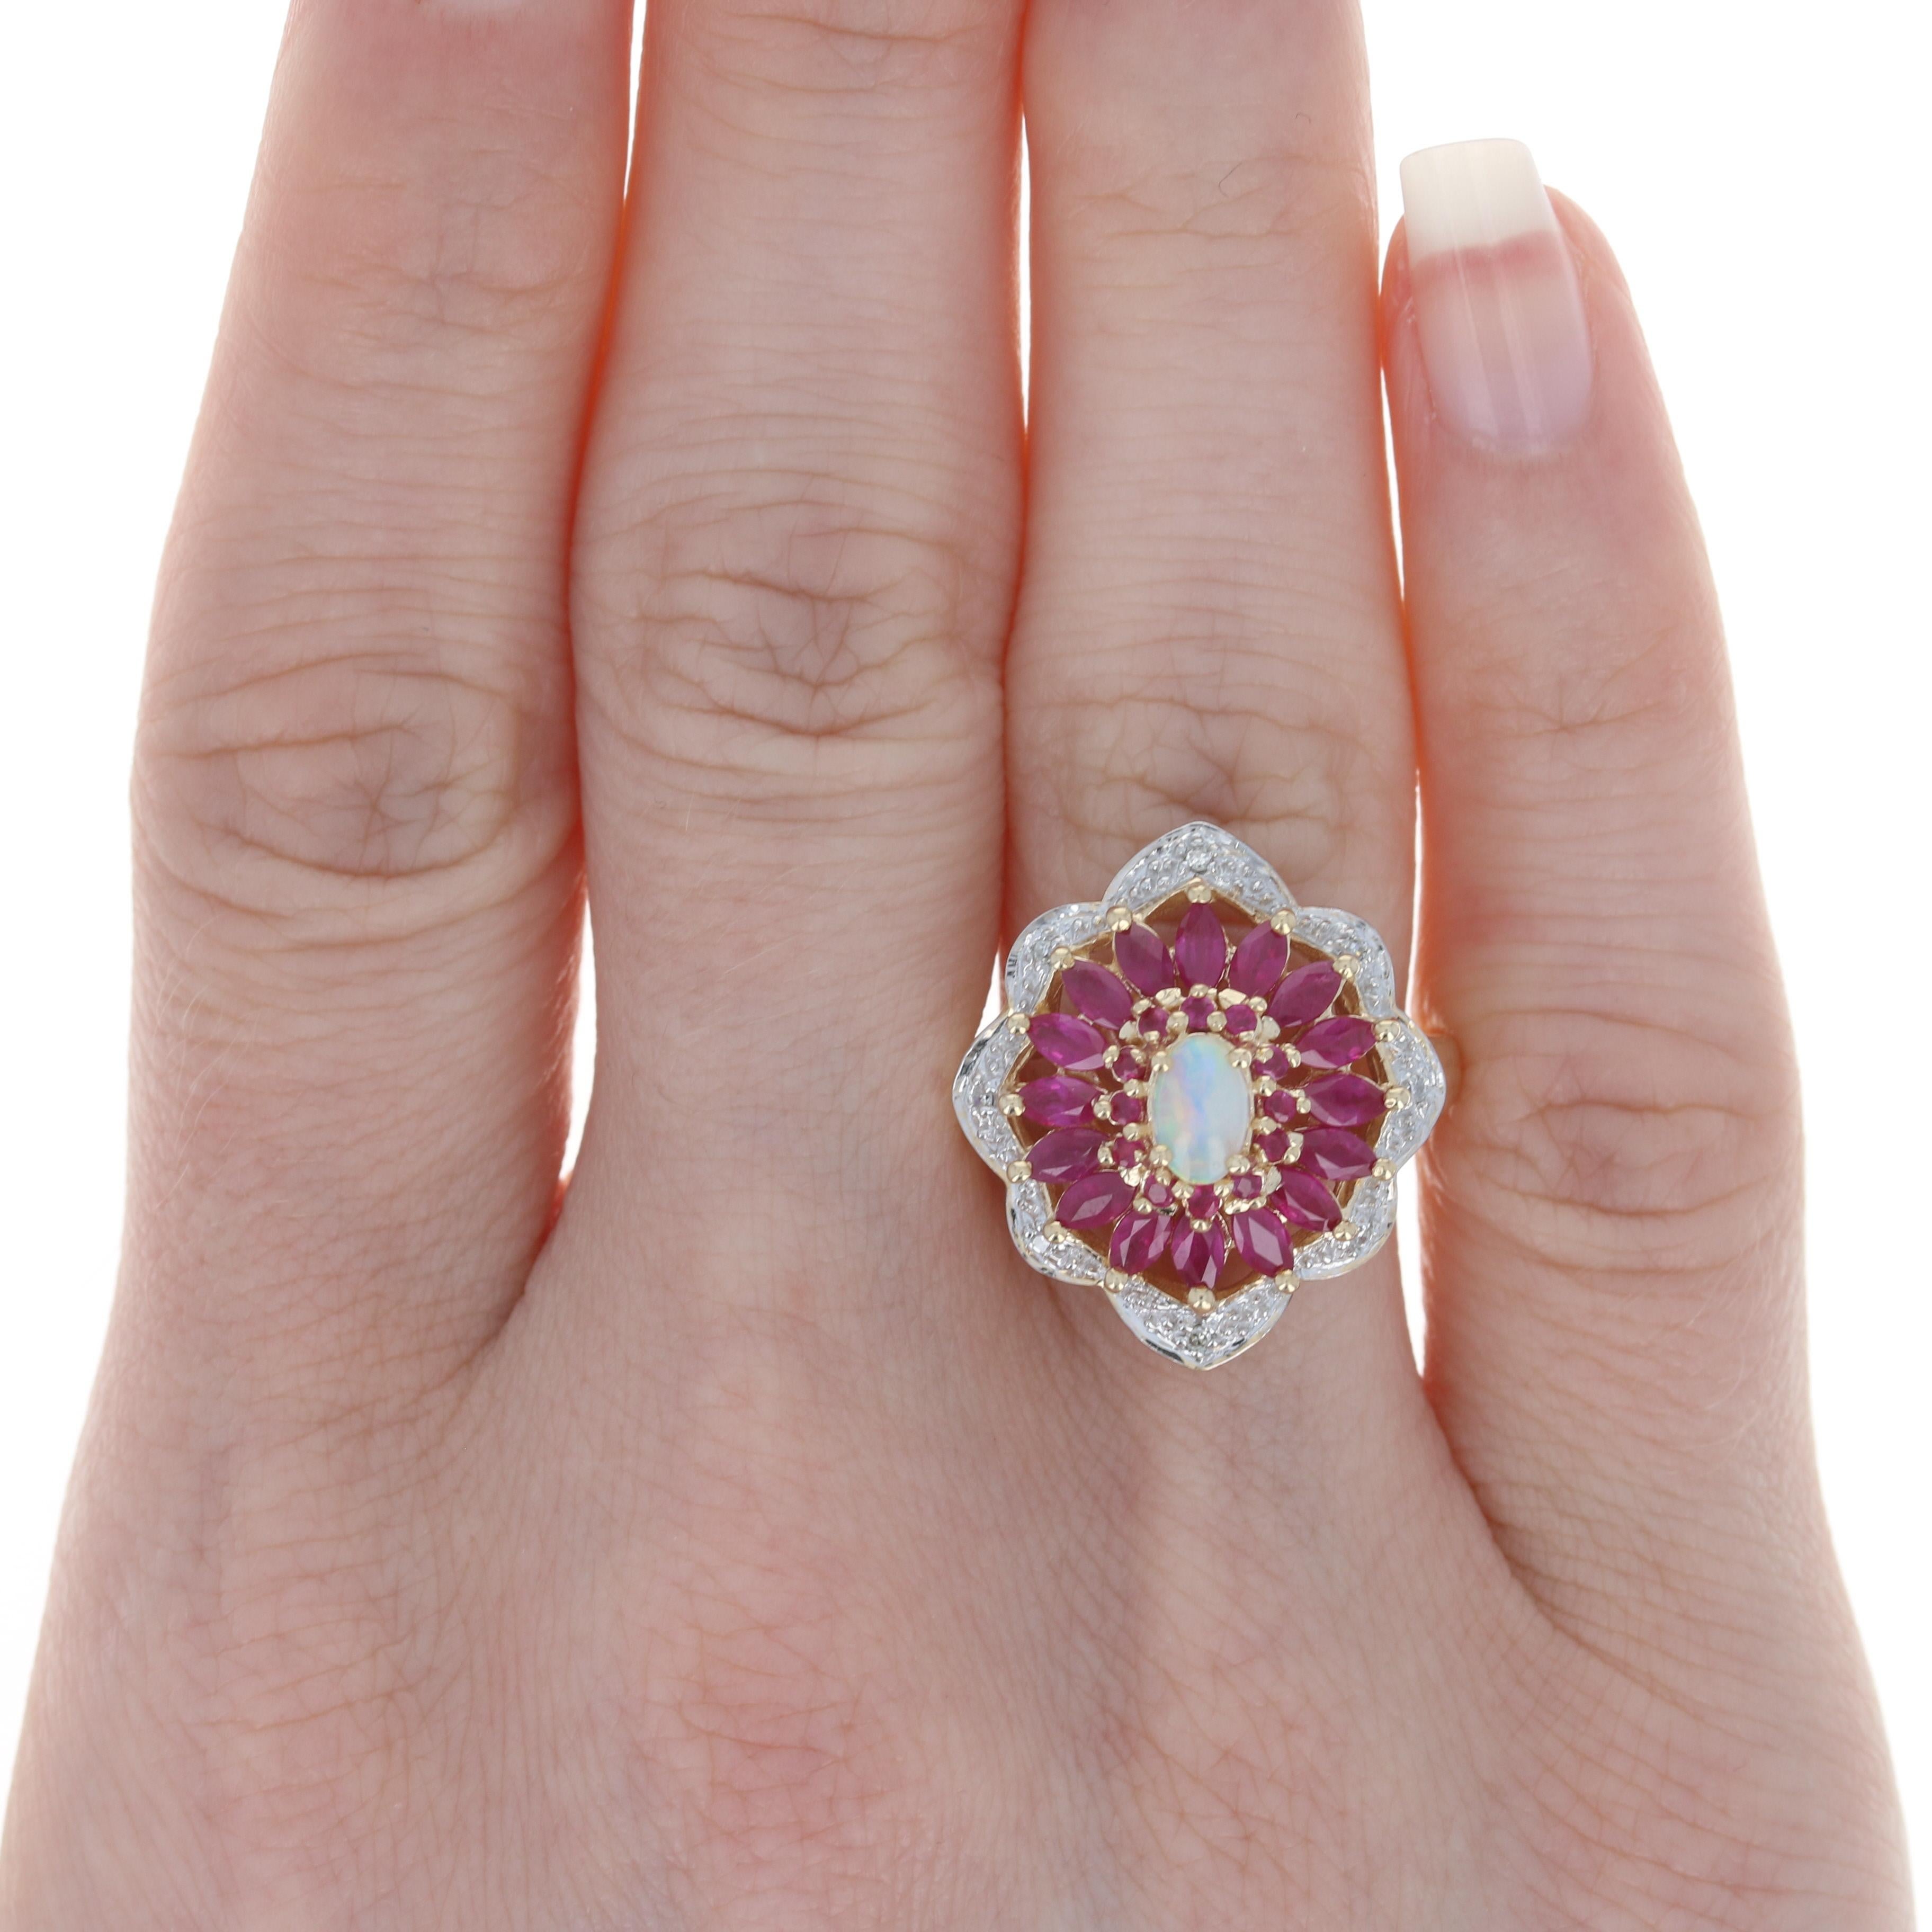 Size: 7
 Sizing Fee: Down or up 1 size for a $30 fee
 
 Metal Content: 10k Yellow Gold & 10k White Gold
 
 Stone Information: 
 Genuine Opal
 Carat: .24ct
 Cut: Oval Cabochon
 Size: 5.9mm X 3.8mm
 
 Genuine Rubies
 Treatment: Heating 
 Carats: